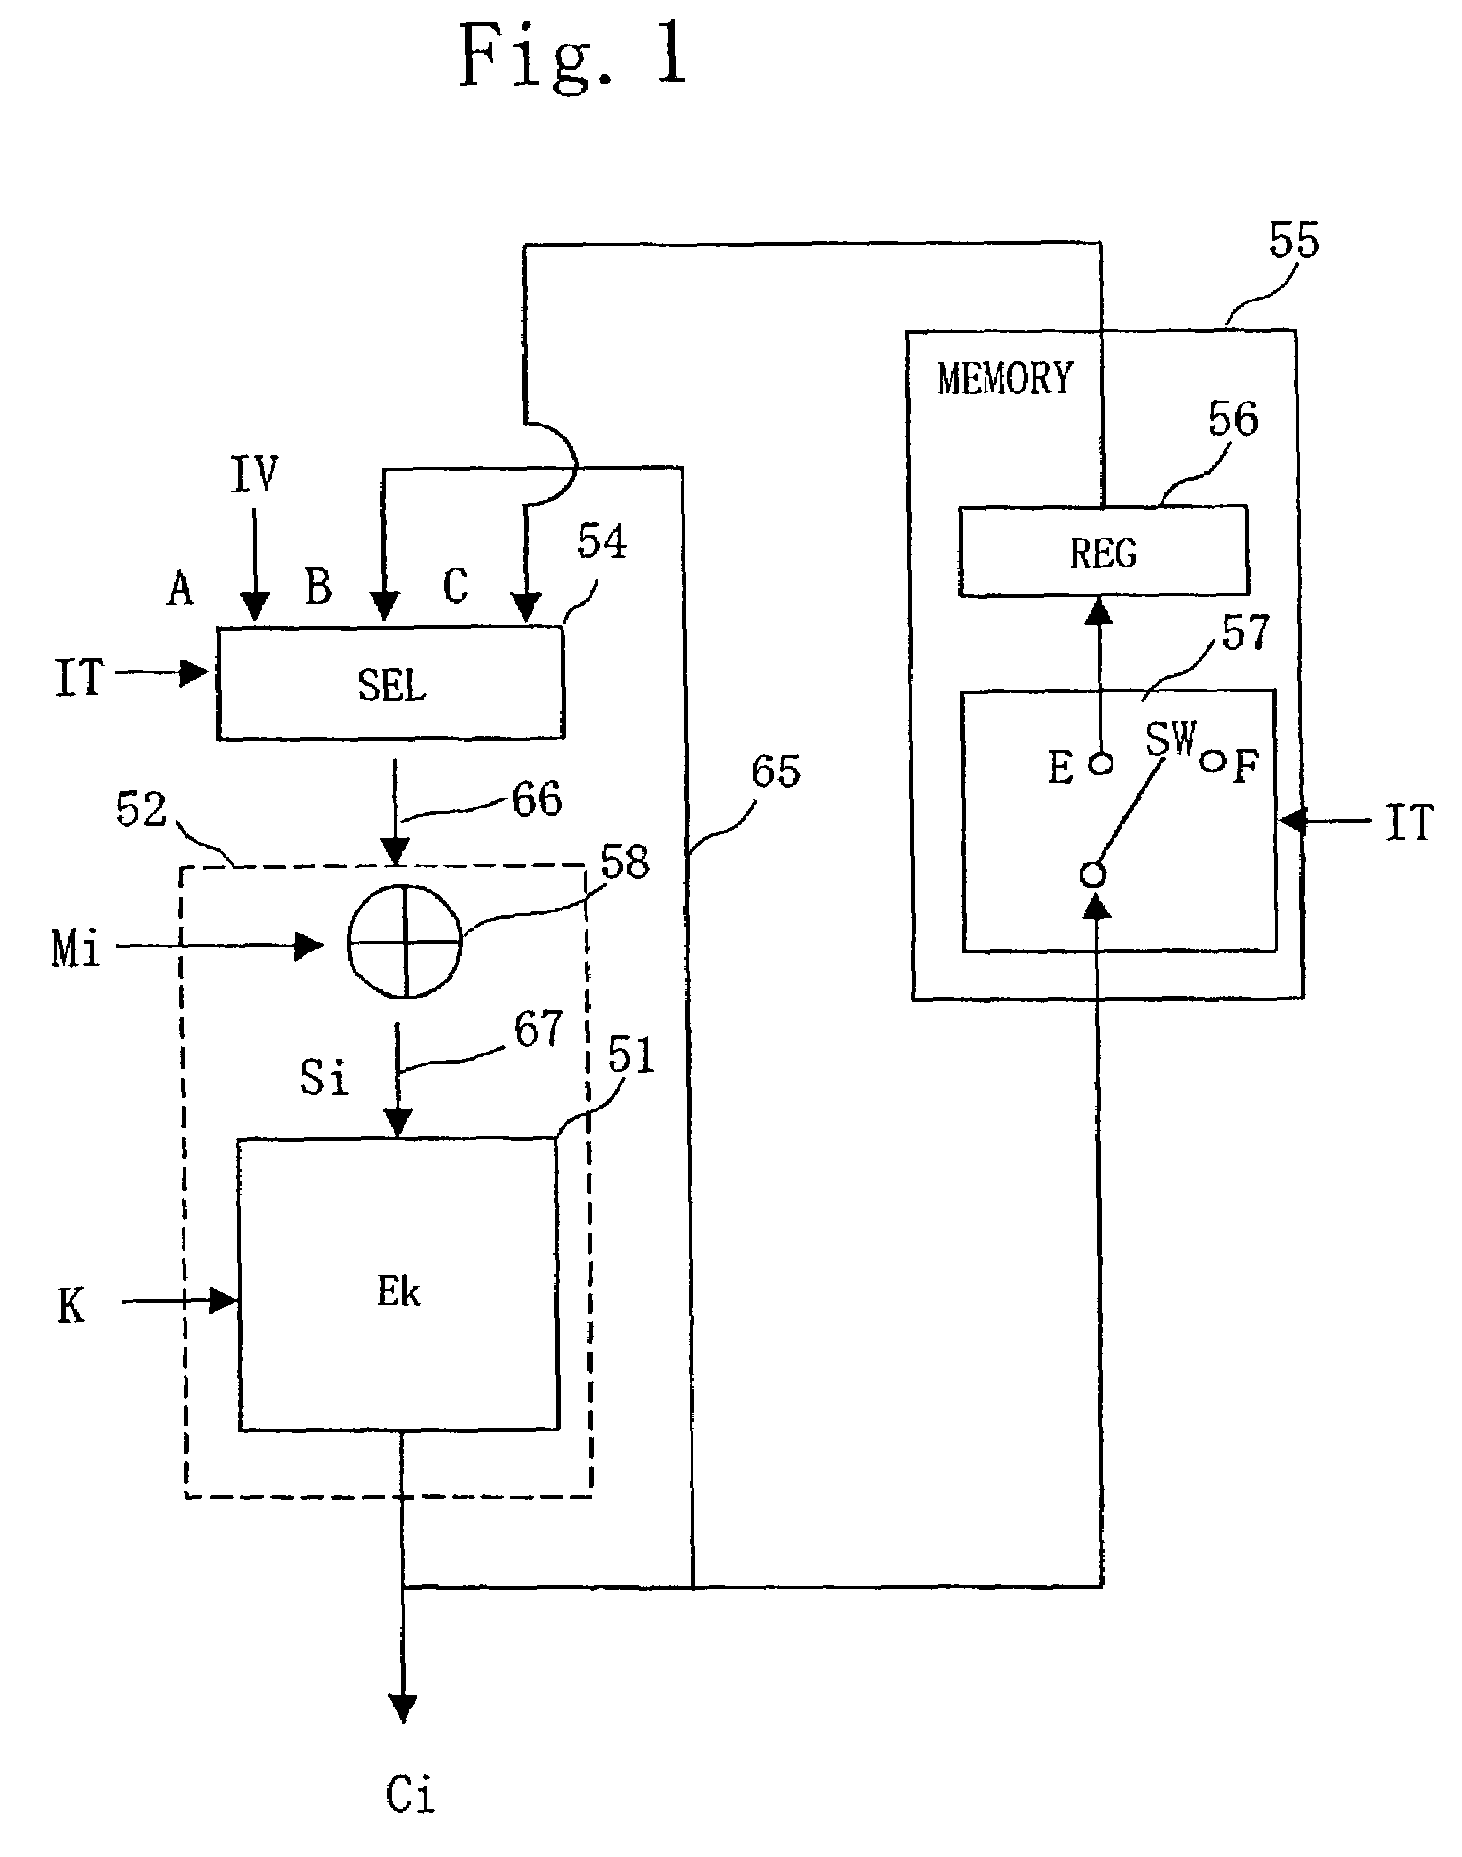 Method and apparatus for encryption, method and apparatus for decryption, and computer-readable medium storing program